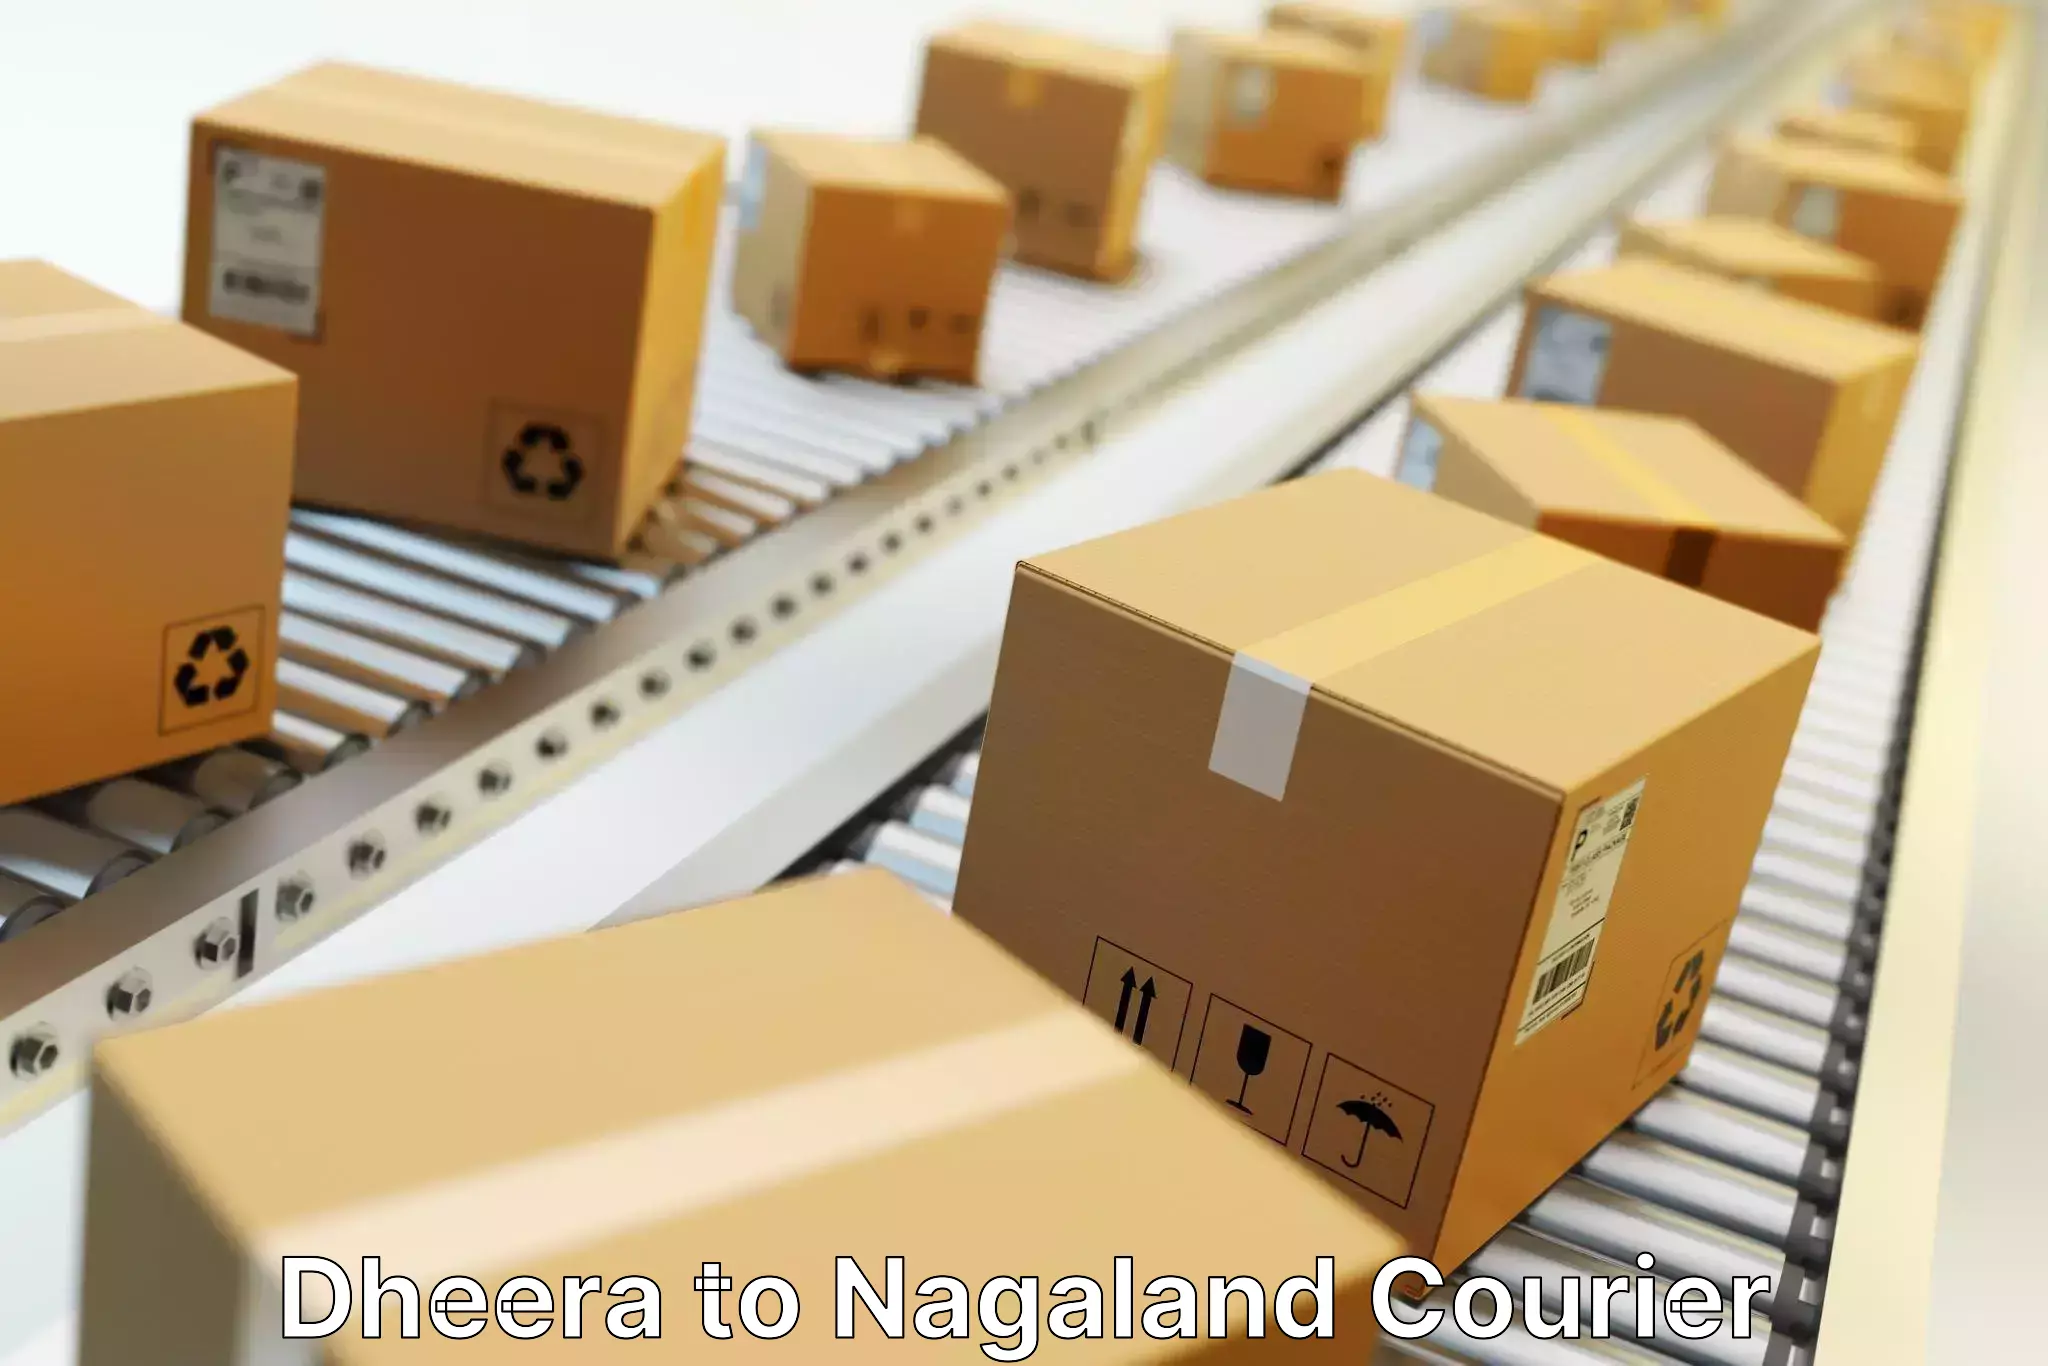 Nationwide delivery network in Dheera to Nagaland